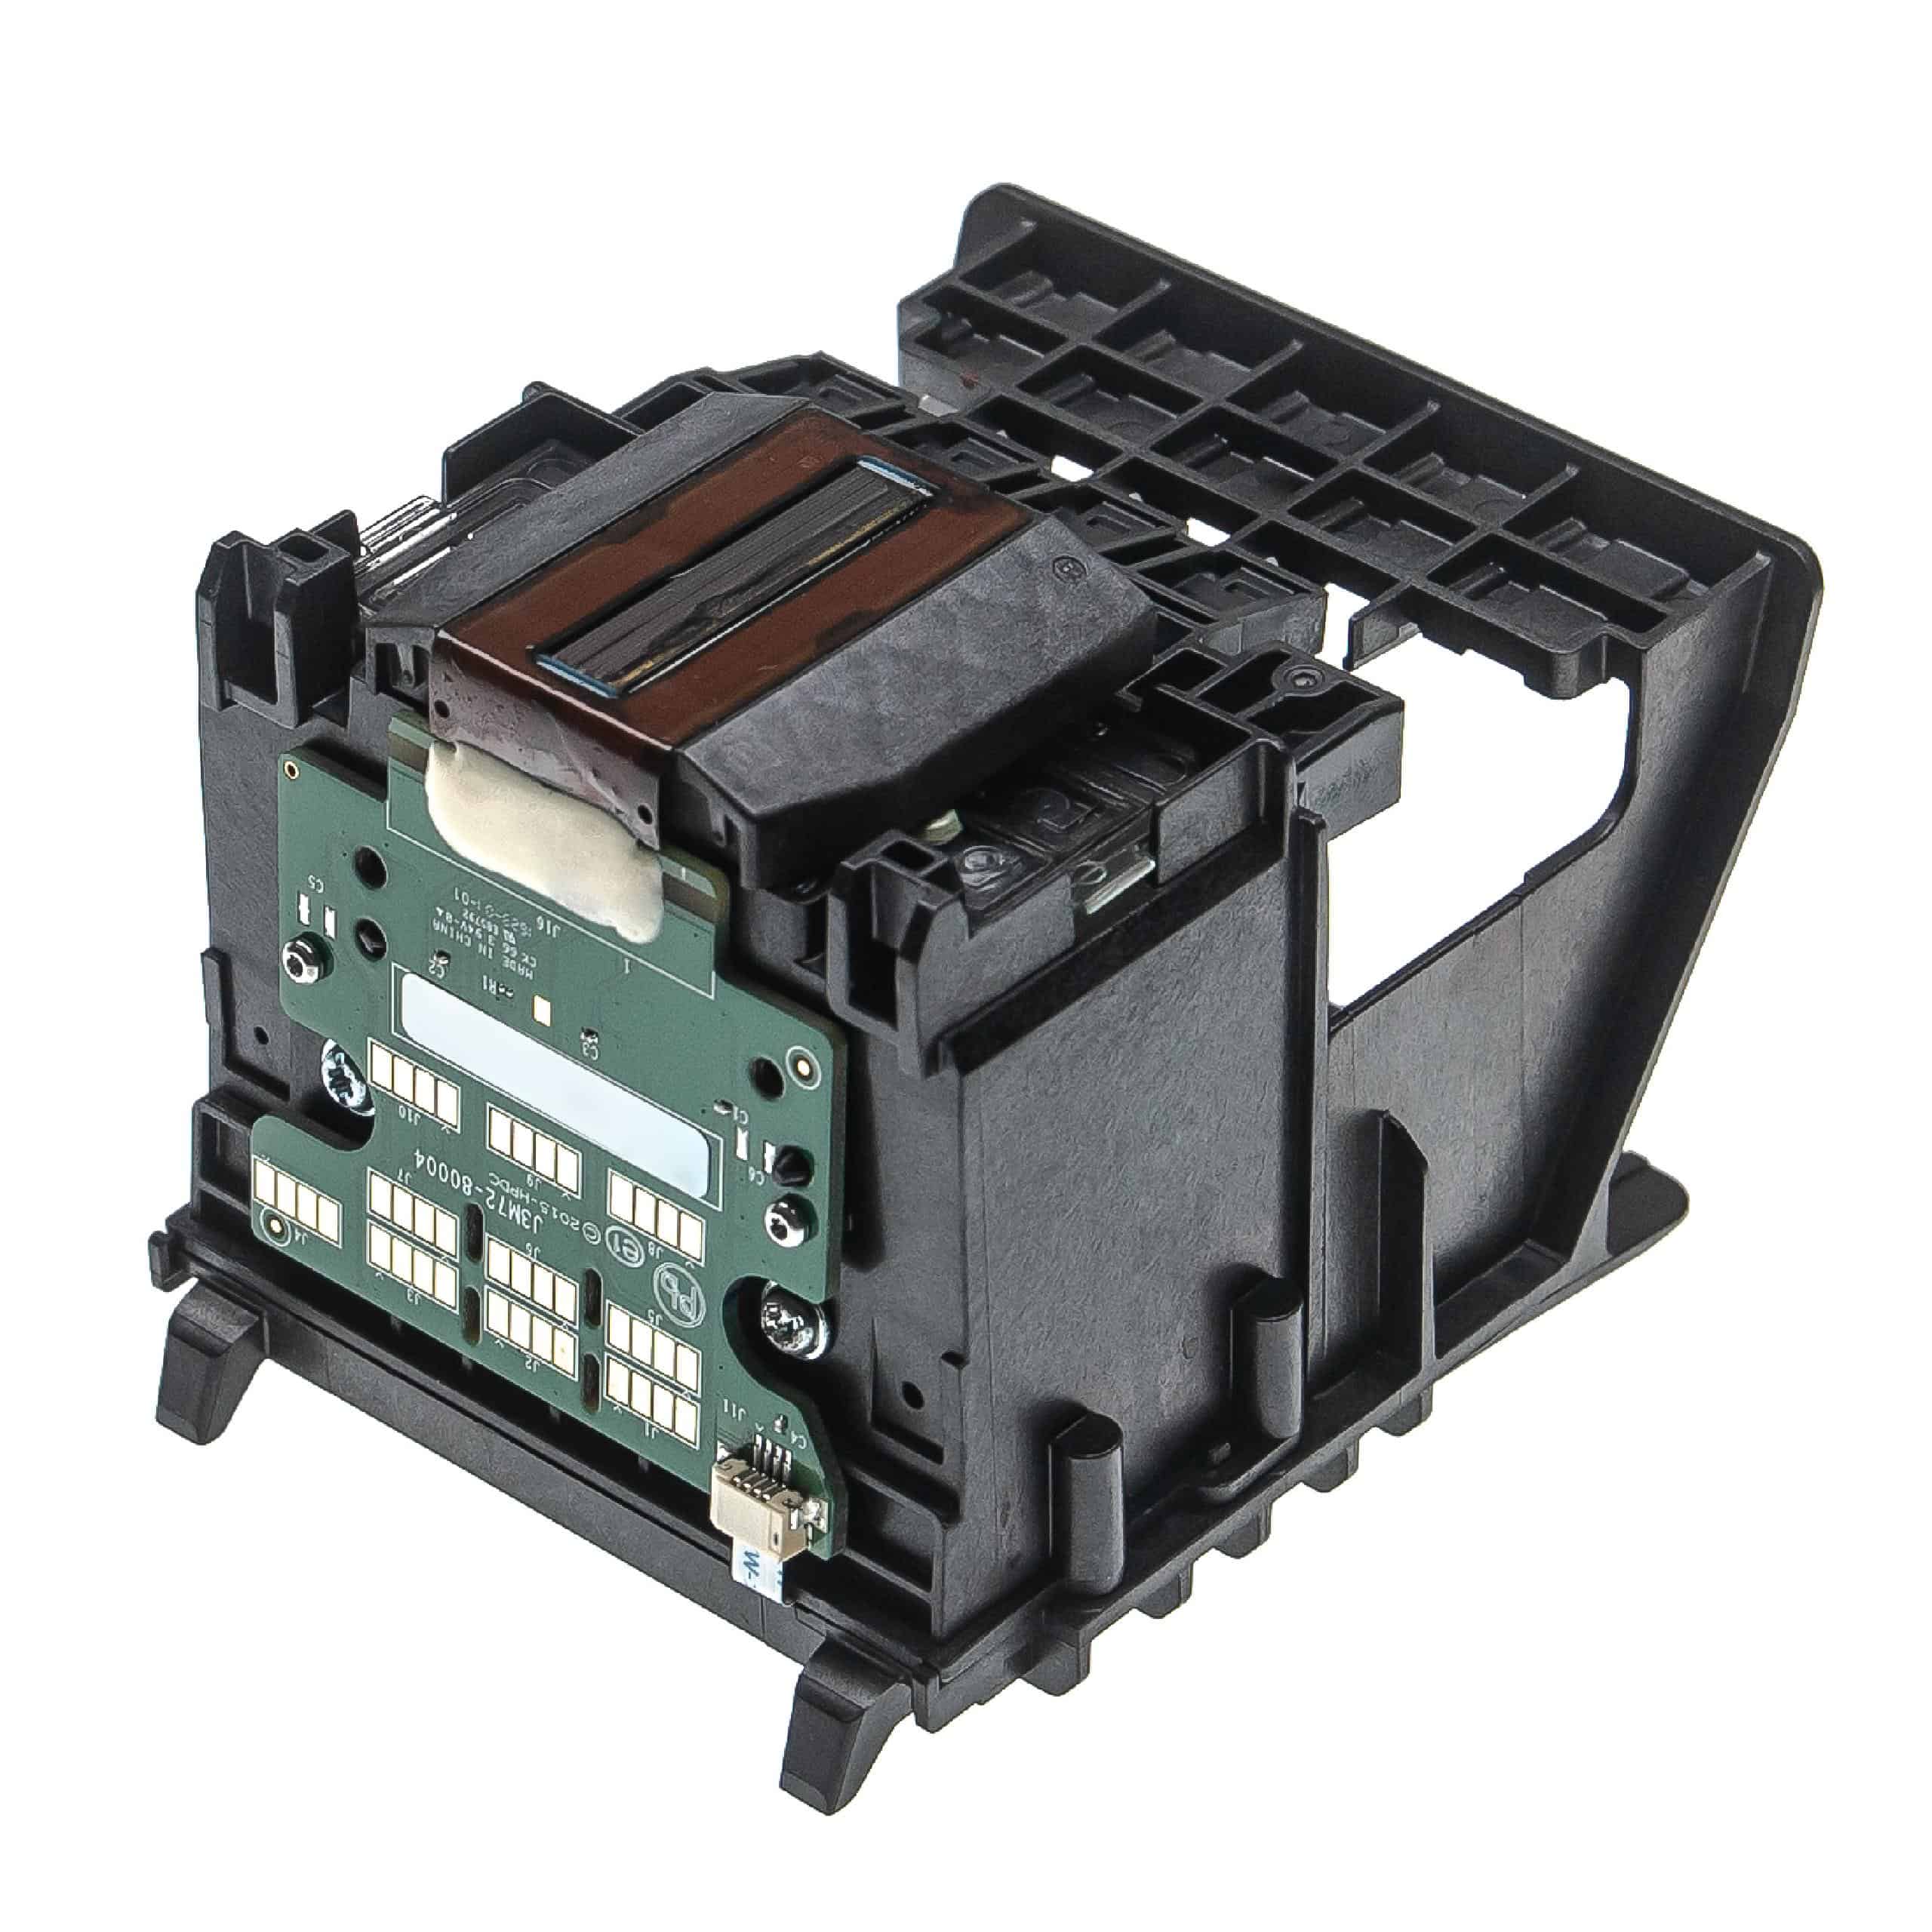 Printhead for HP Officejet Pro HP M0H91A Printer - B/C/M/Y, 9.1 cm wide, Refurbished